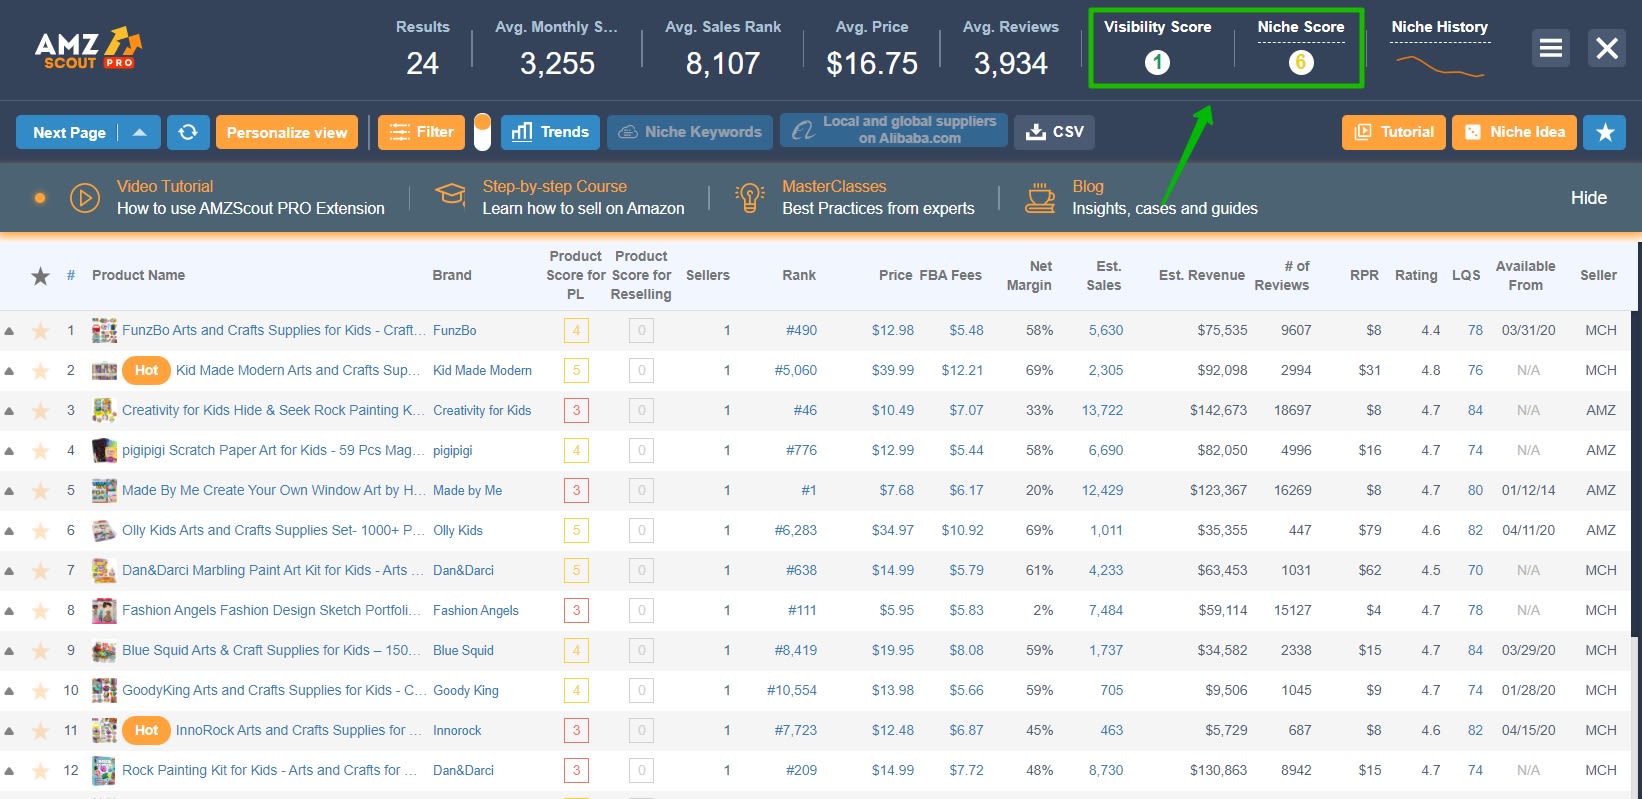 How to analyze Visibility score and Niche score with AMZScout